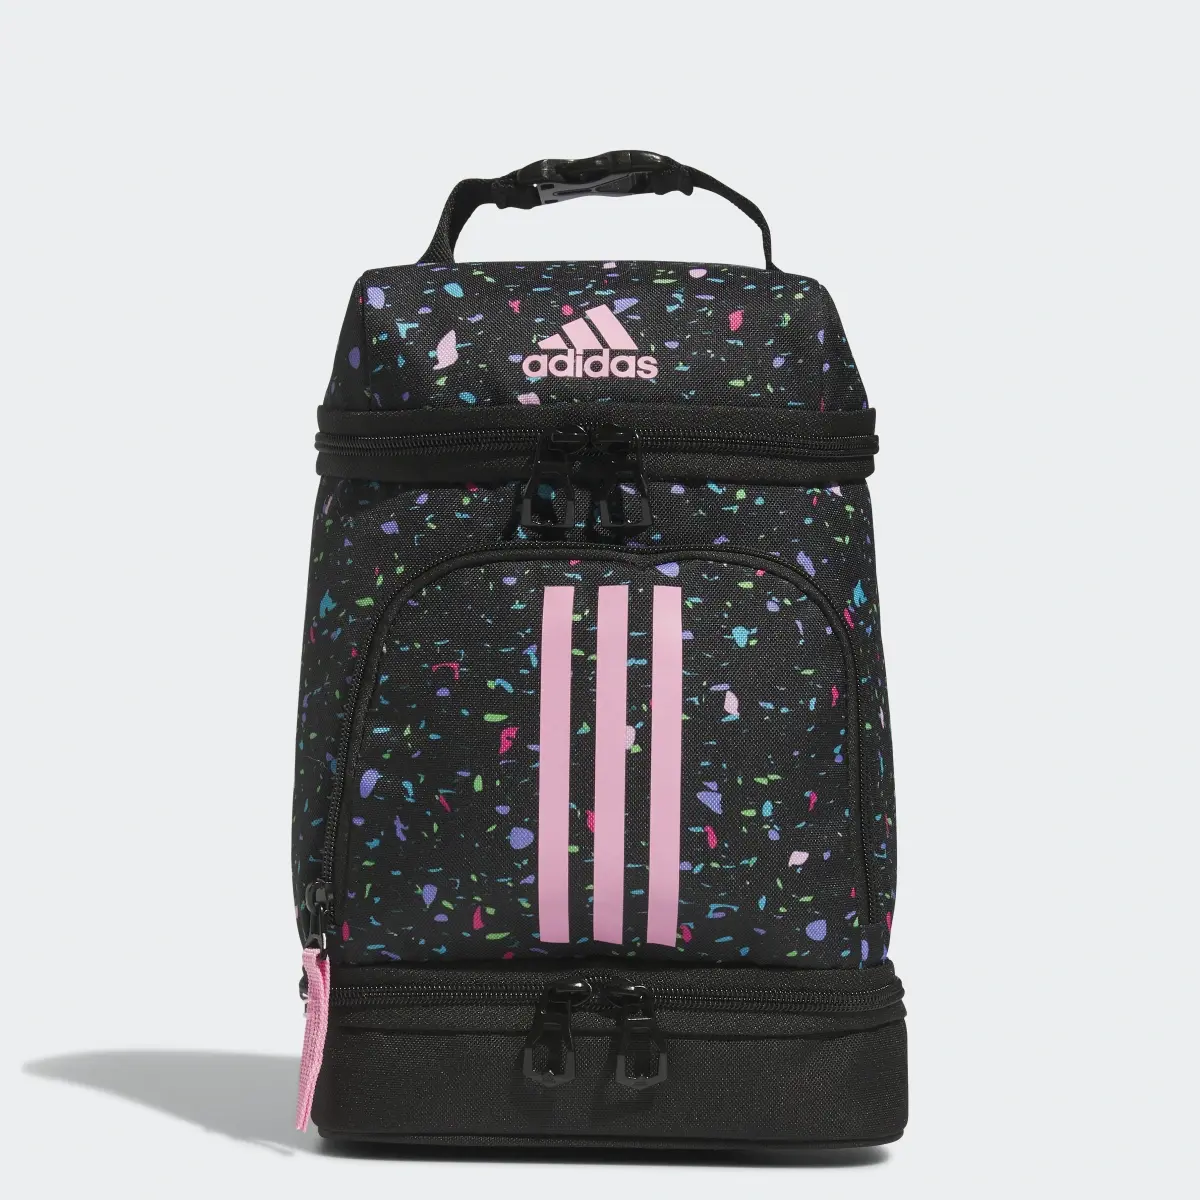 Adidas Excel Lunch Bag. 1